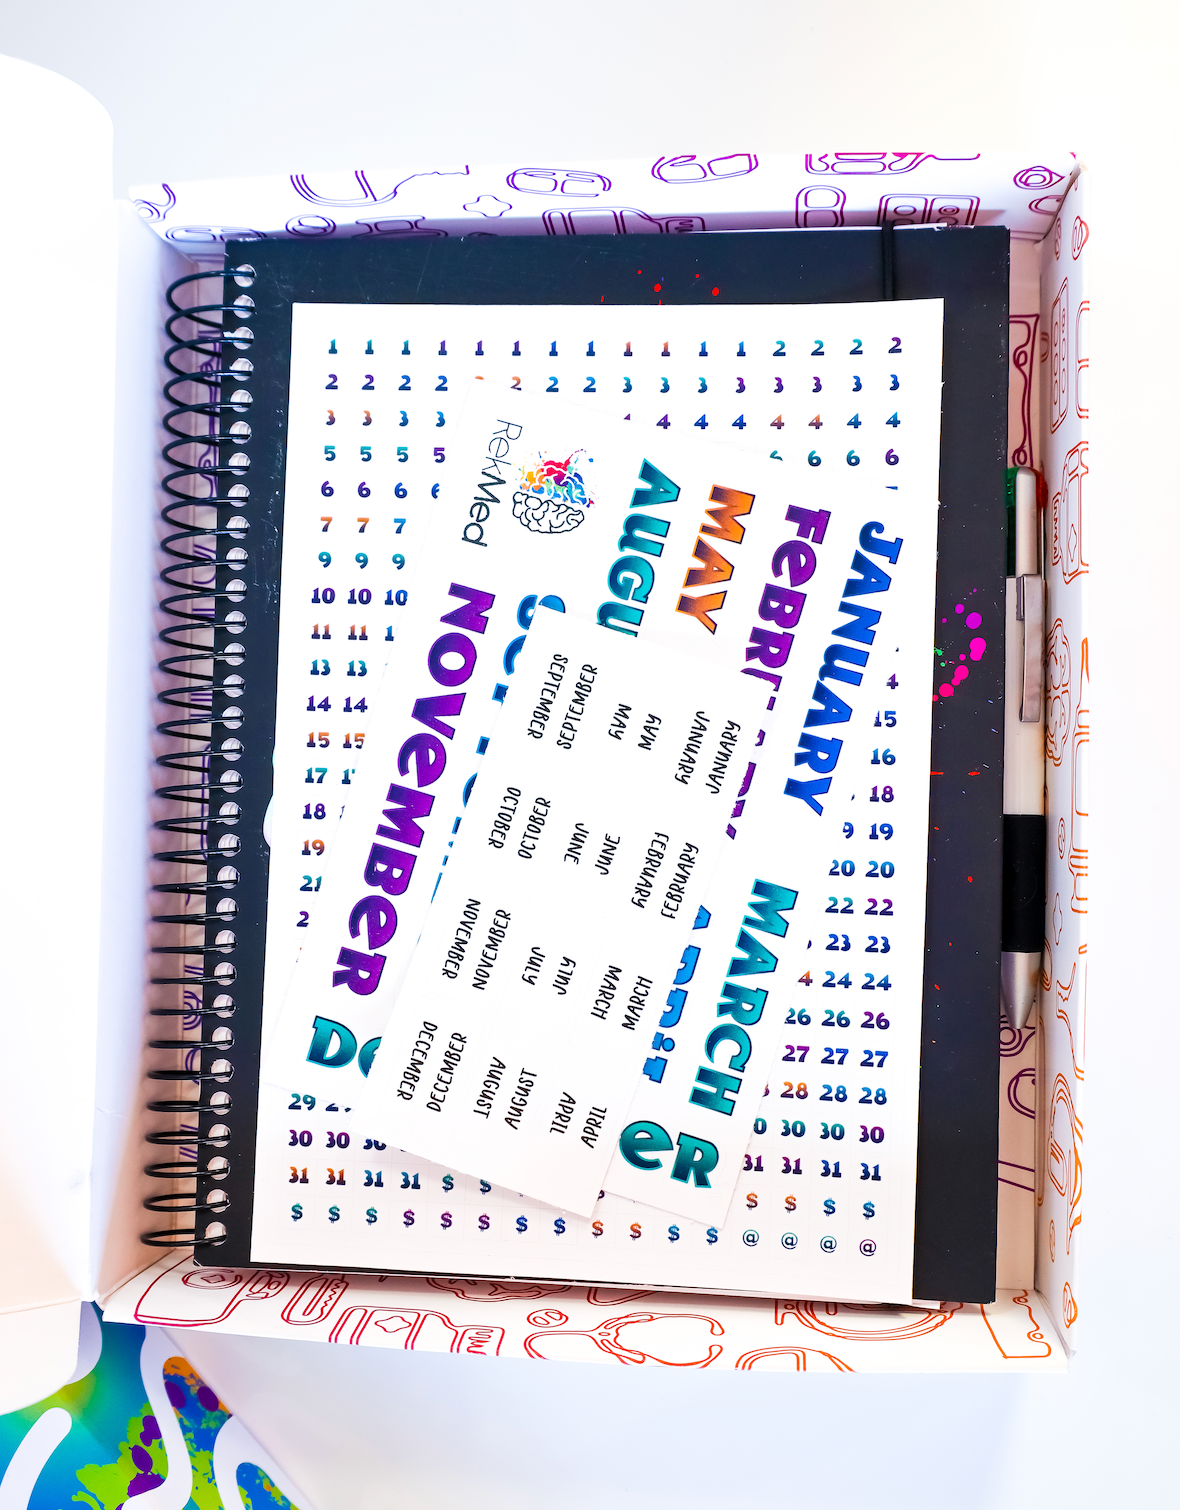 2 Sticker Sheets to Date your Undated Planner!